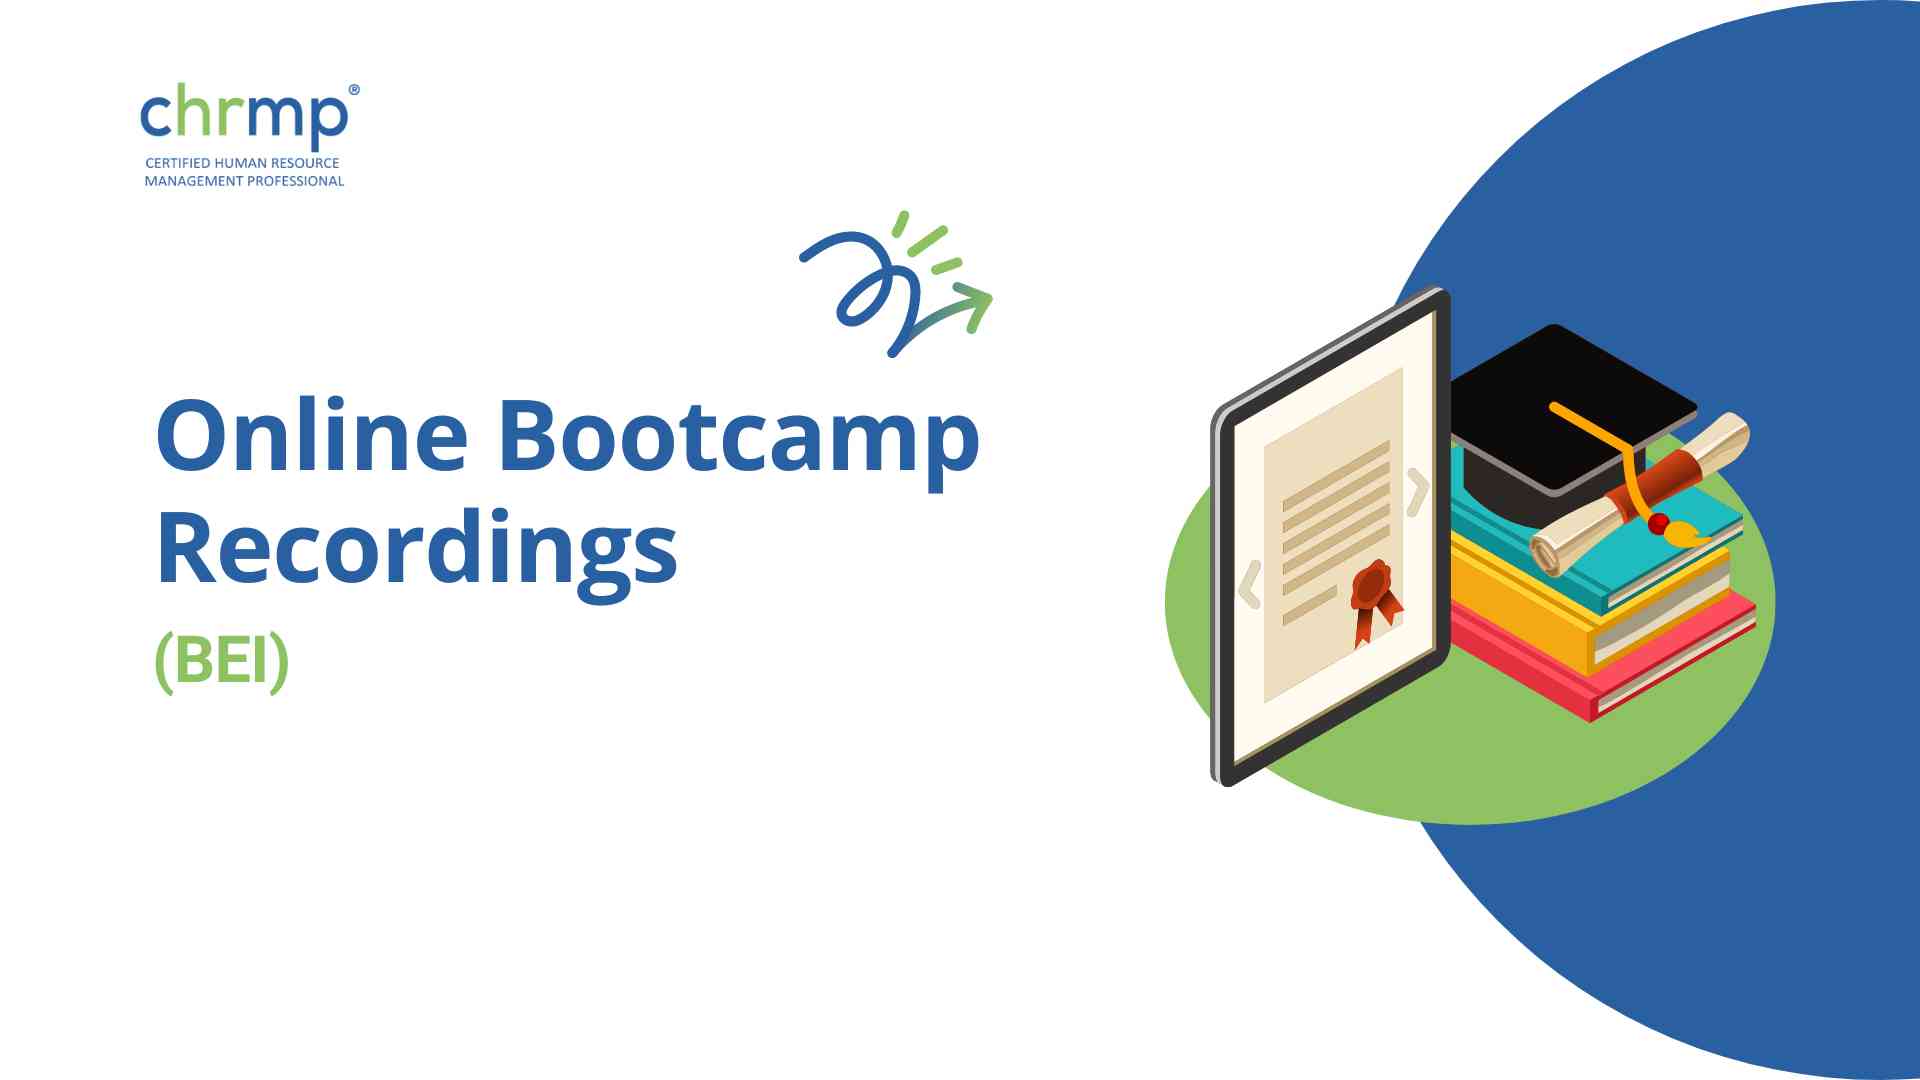 Online Bootcamp Recordings (BEI)